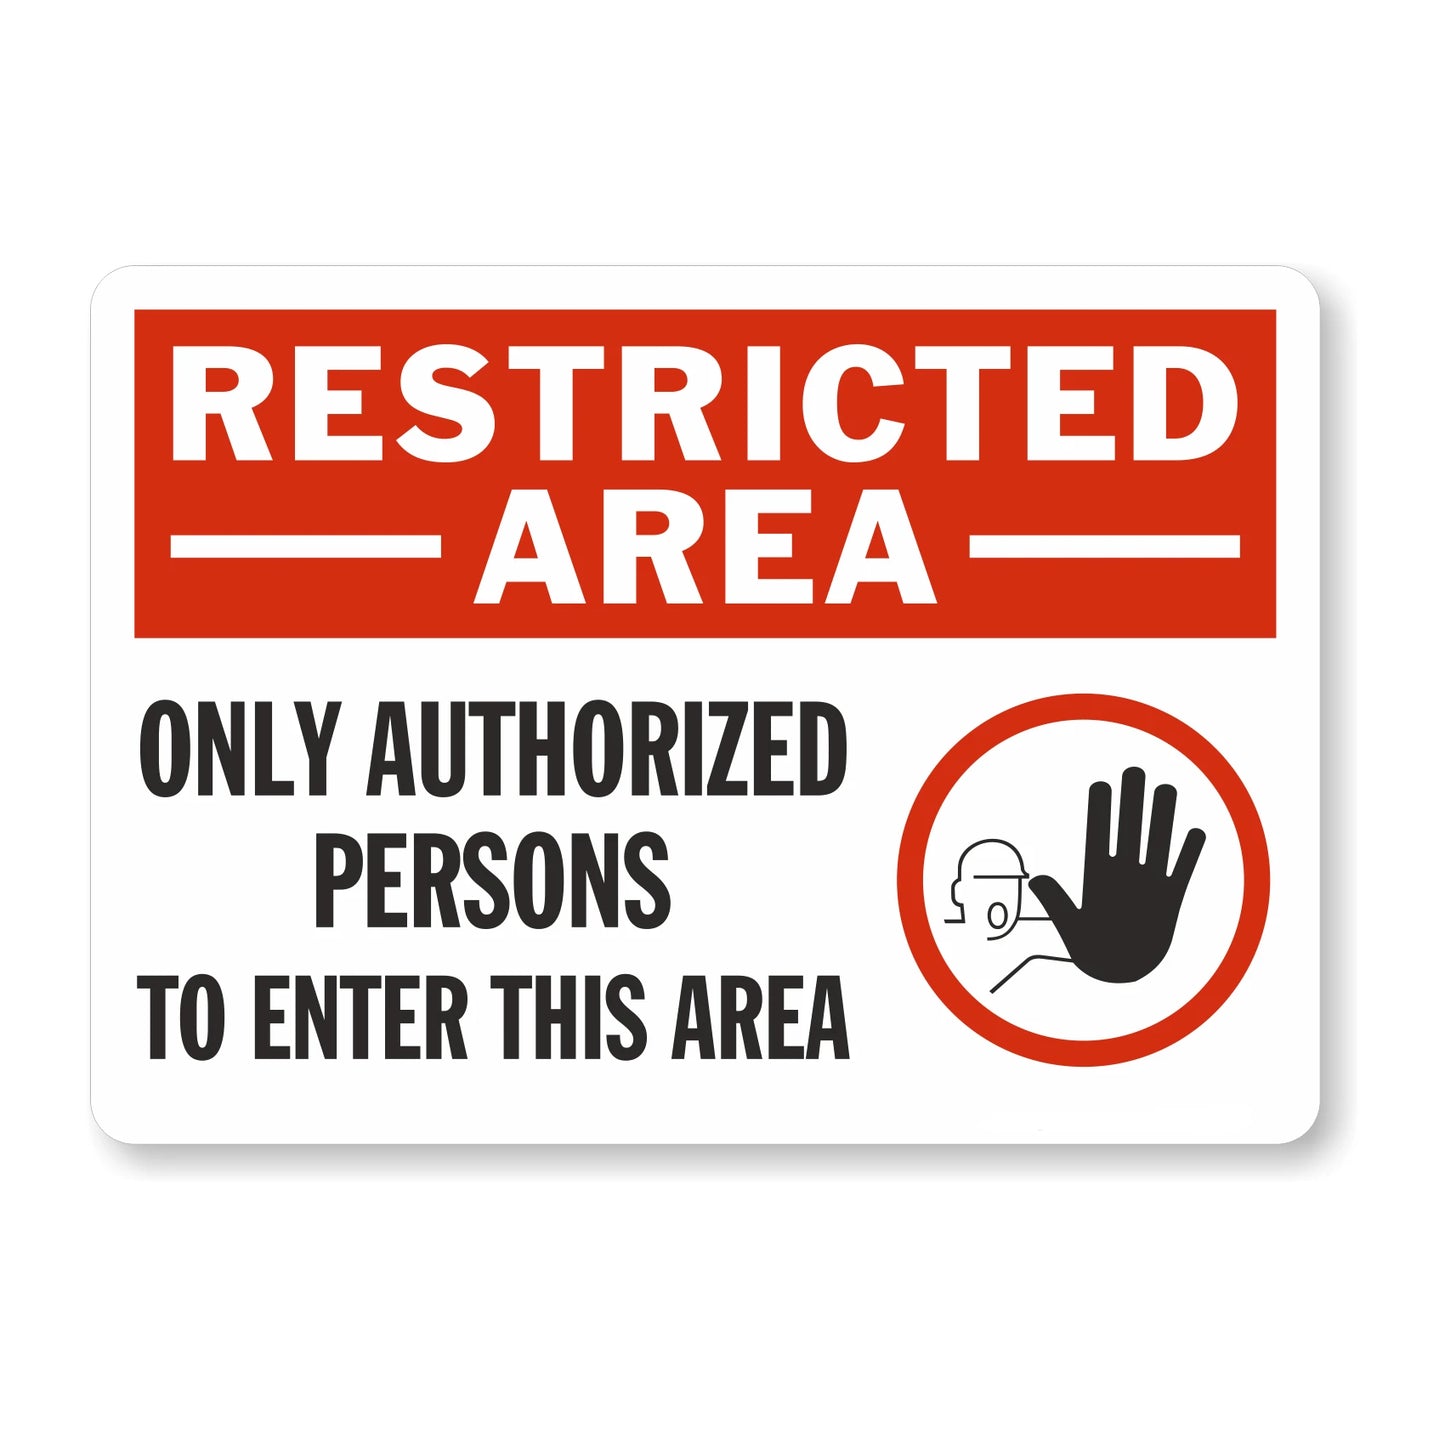 Only Authorized Persons To Enter This Area